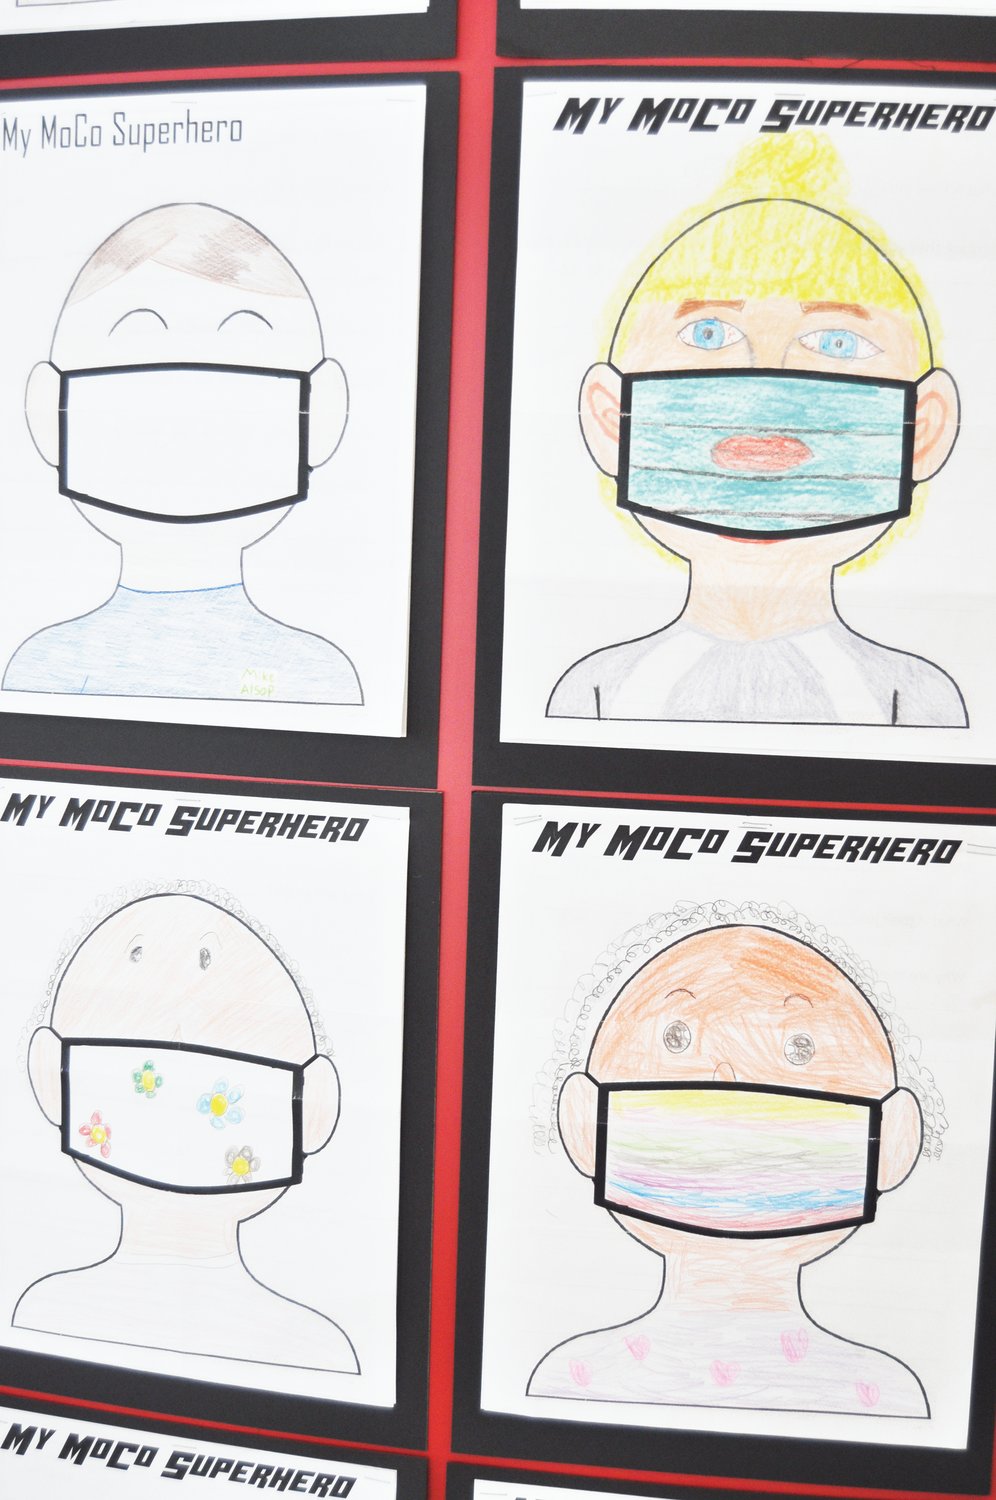 Pictures of "MoCo Superheroes" drawn by children are displayed at the Carnegie Museum of Montgomery County. The pictures are part of an exhibit documenting children's voices in the coronavirus pandemic.